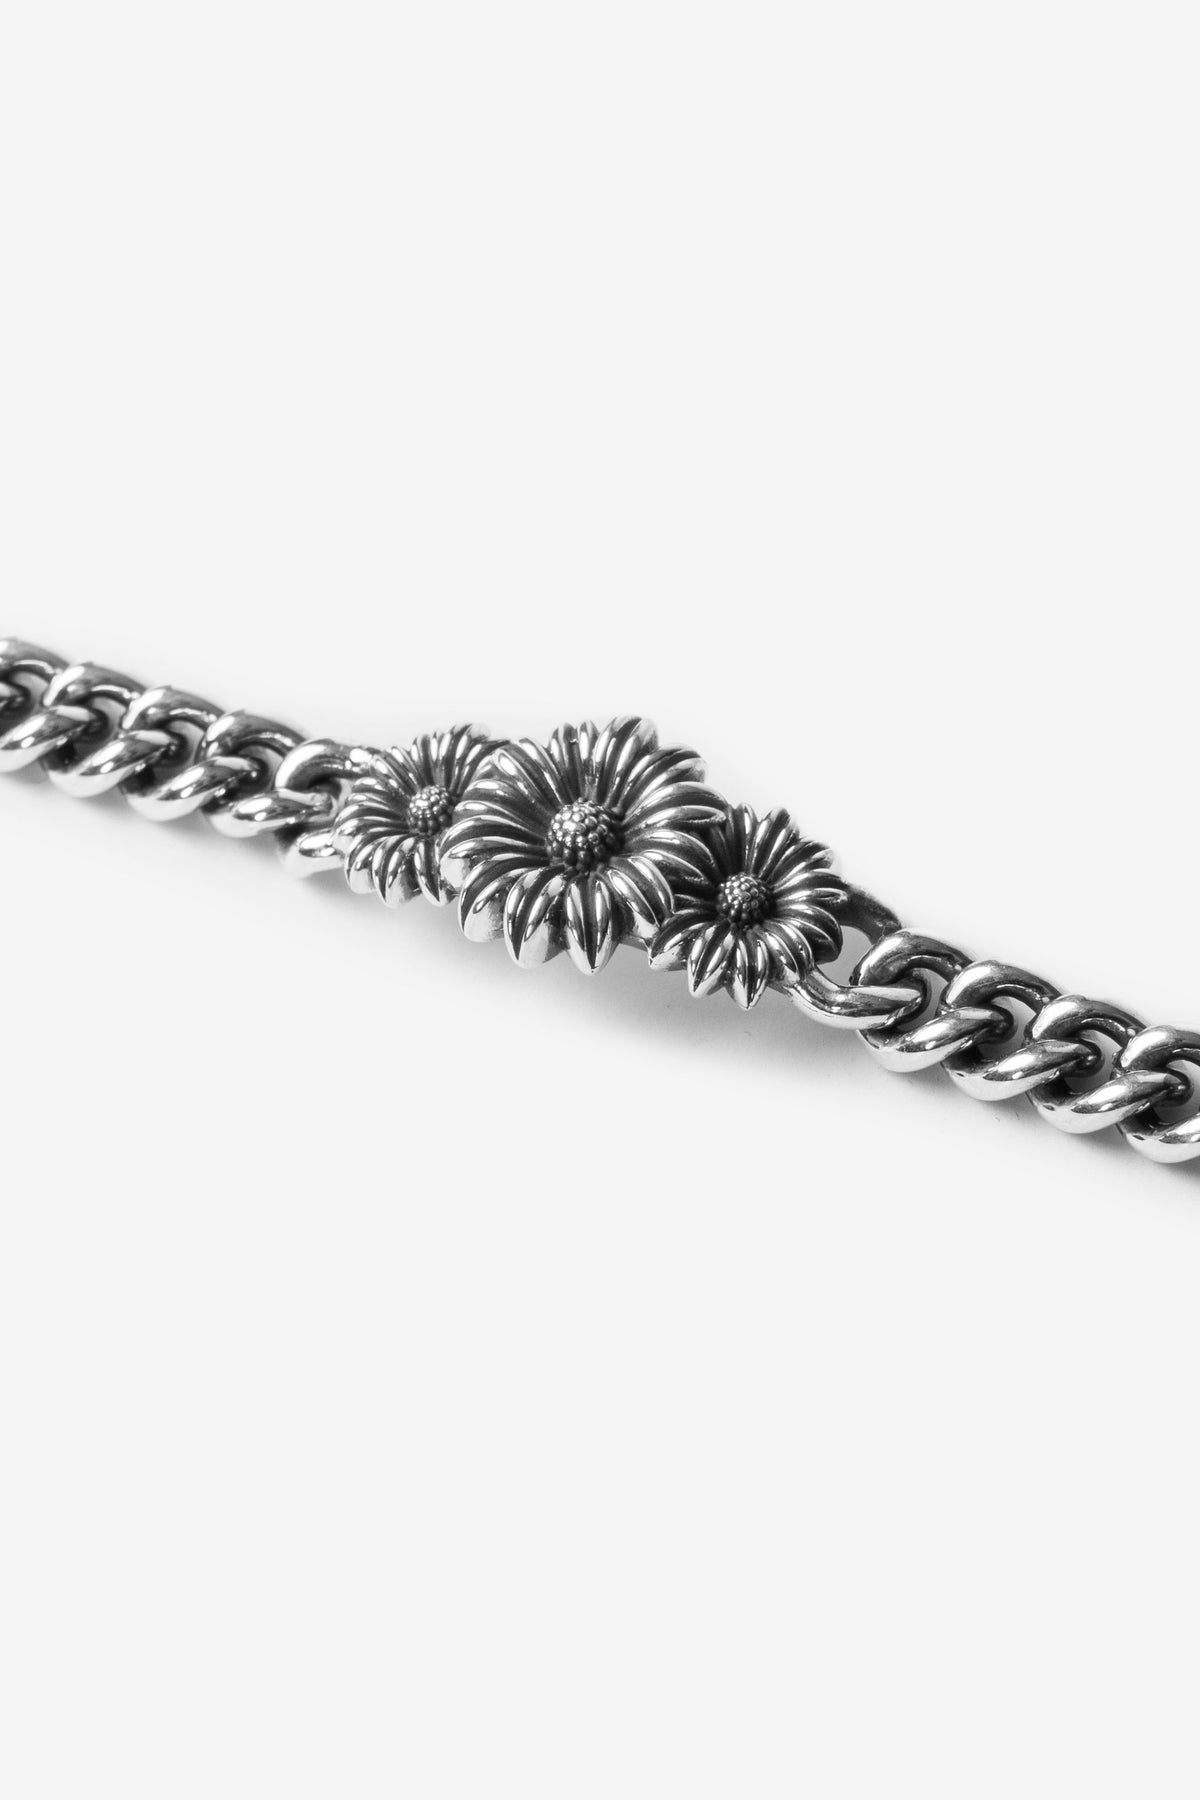 Good Art Hlywd for Goodfight Corsage ID Bracelet 18cm / Silver